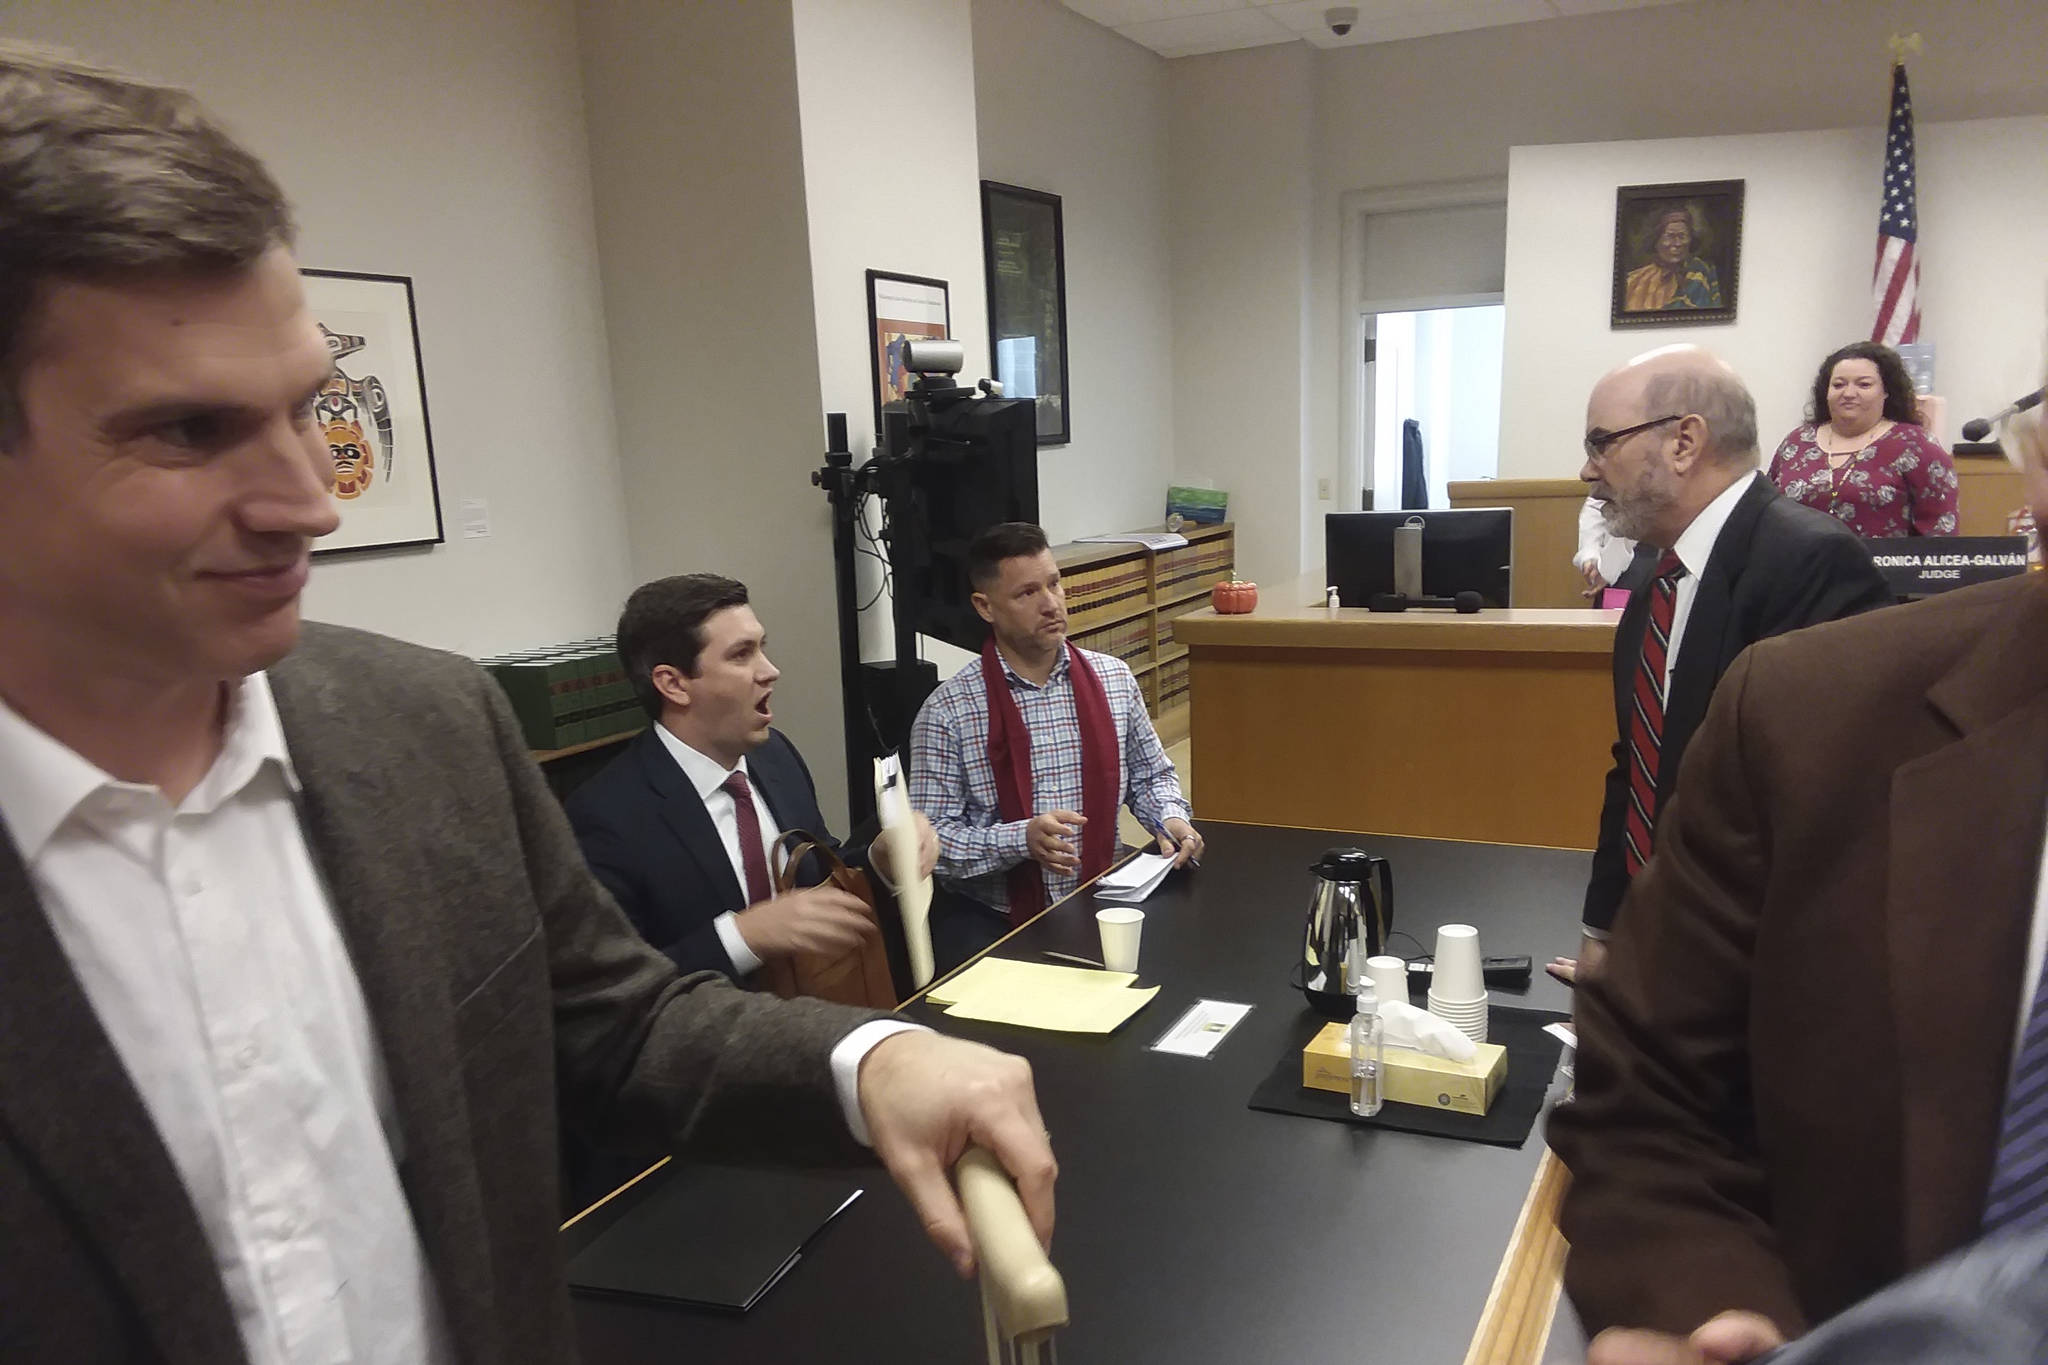 Judge Veronica Alicea-Galván’s courtroom just after hearing arguments on the I-27 lawsuit on Friday, Oct. 13, 2017. From left to right: Mark Cooke of the ACLU-WA; State Rep. Drew Stokesbary, serving as counsel to the defendants; Bothell City Council member and I-27 organizer Joshua Freed; Jeff Slayton, counsel from the Seattle City Attorney’s Office; court staff; and the brown-coated shoulder of Dr. Bob Wood, former director of the HIV/AIDS Program at Public Health Seattle/King County. Photo by Casey Jaywork